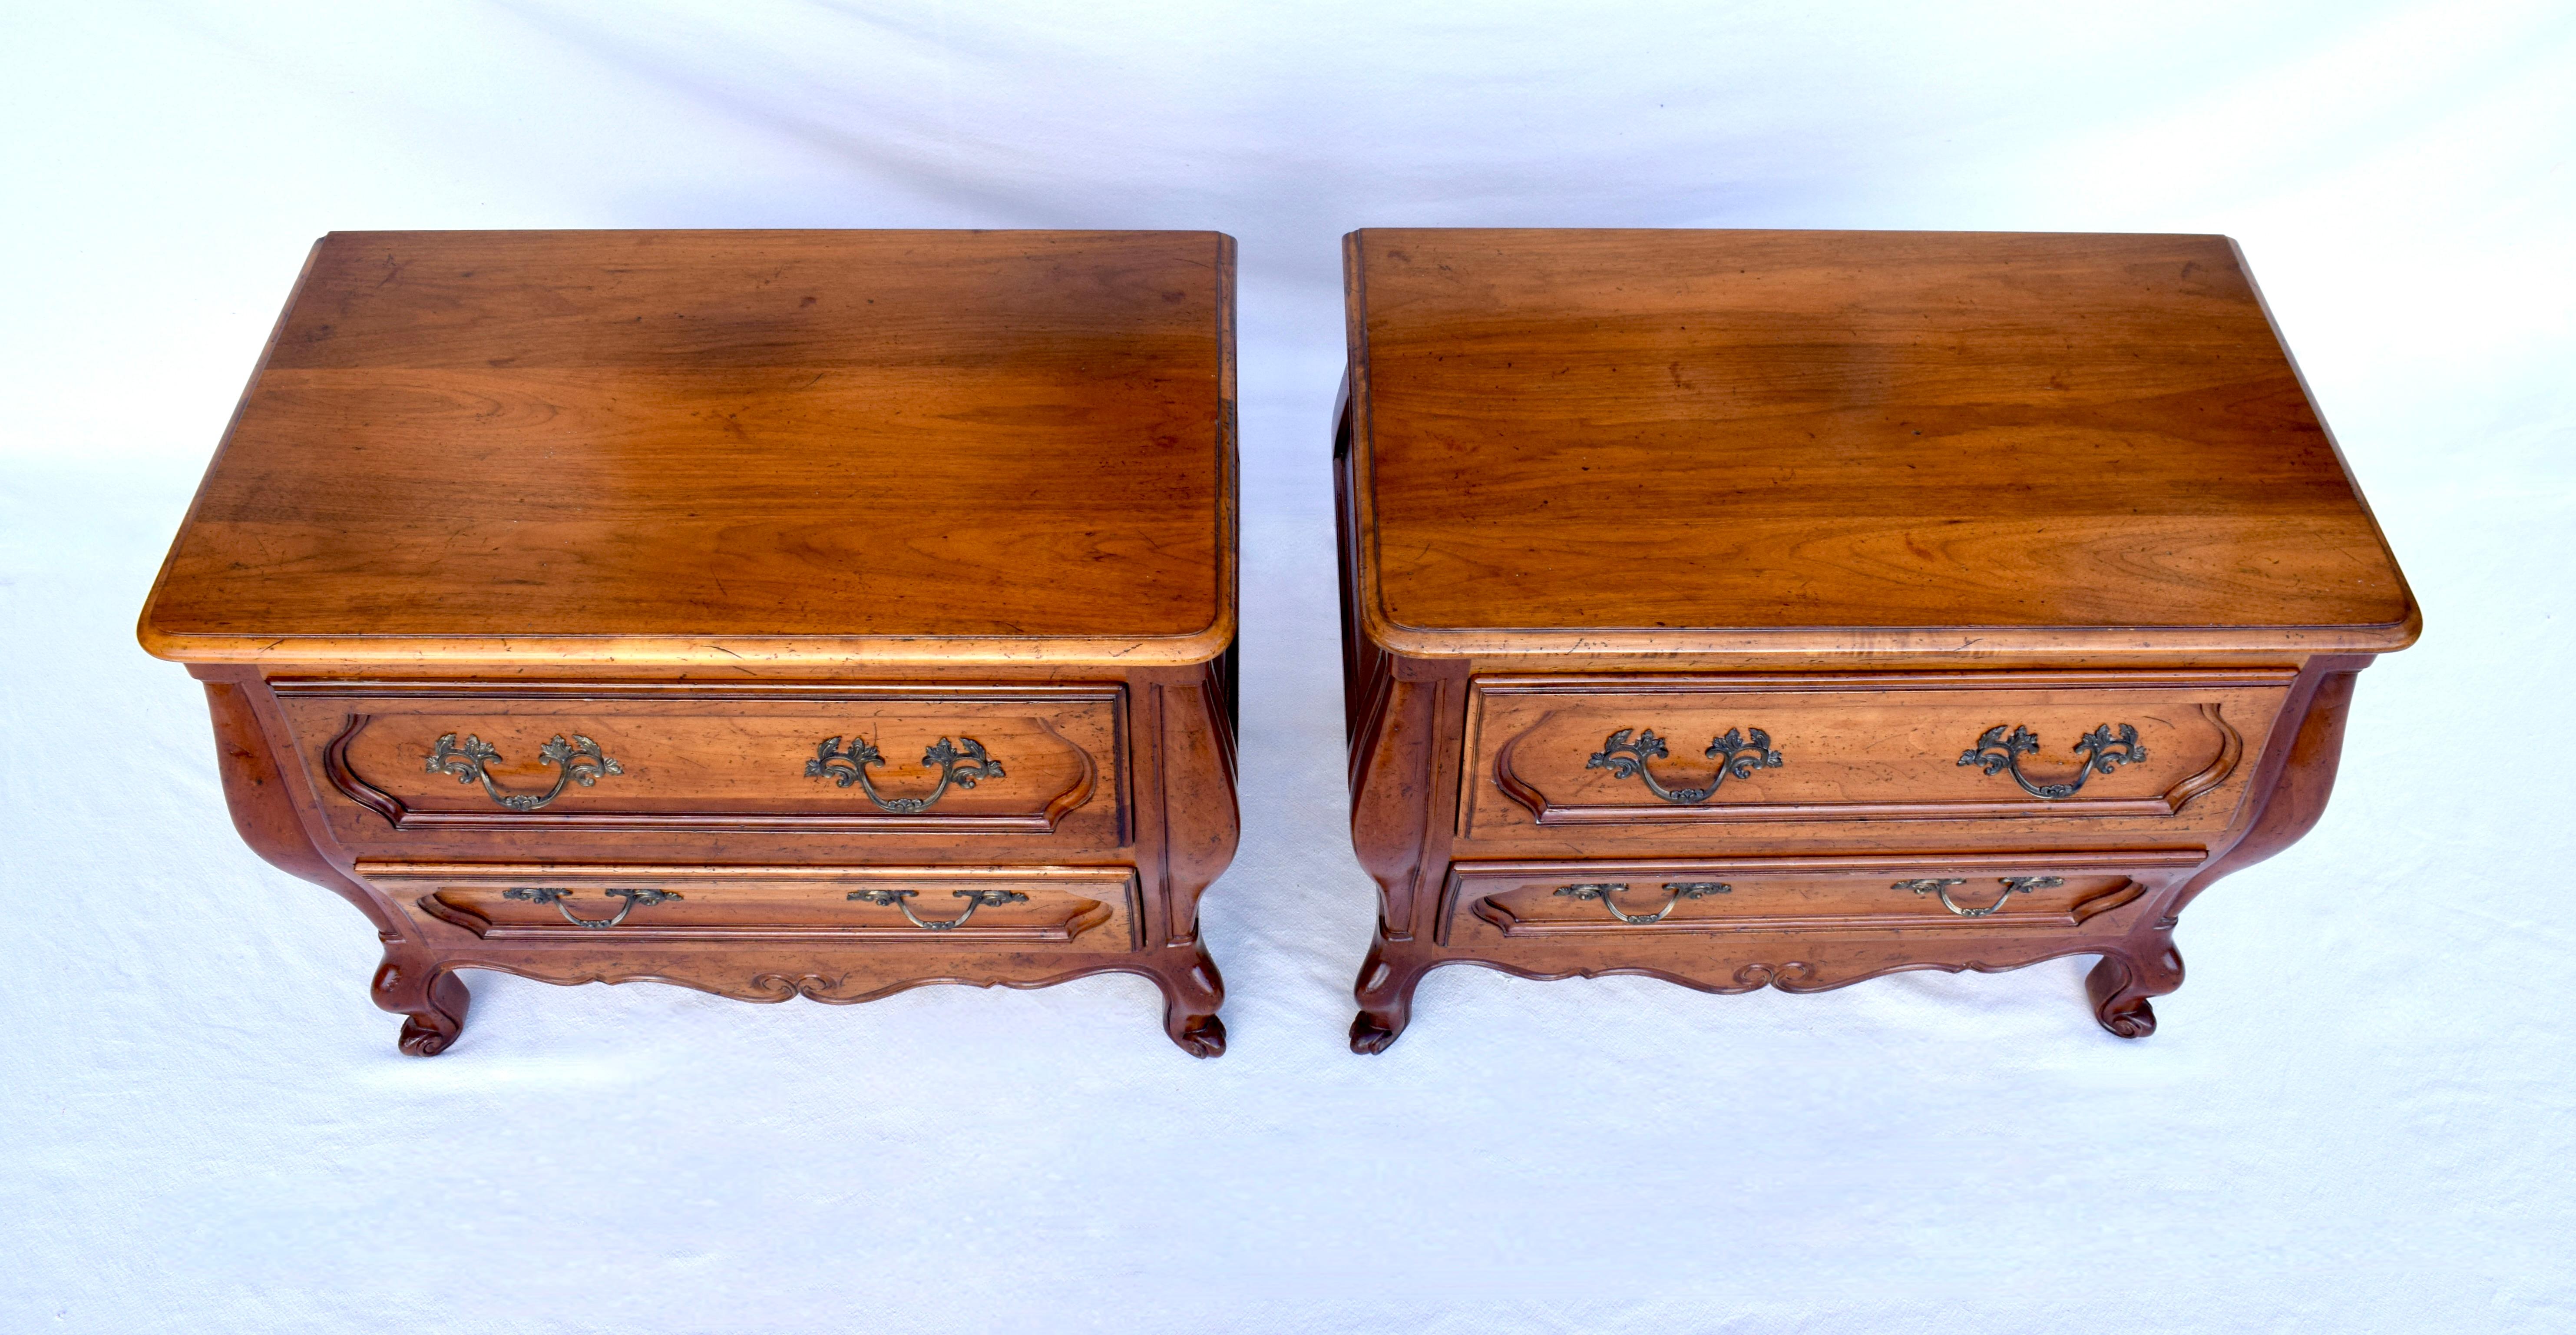 Magnificent French Provincial nightstands finely crafted by Baker Furniture. Grand in scale with a bombe silhouette featuring curvaceous apron, sweet cabriole legs and intricate hardware. These lovely bedside chests will add Country French charm to